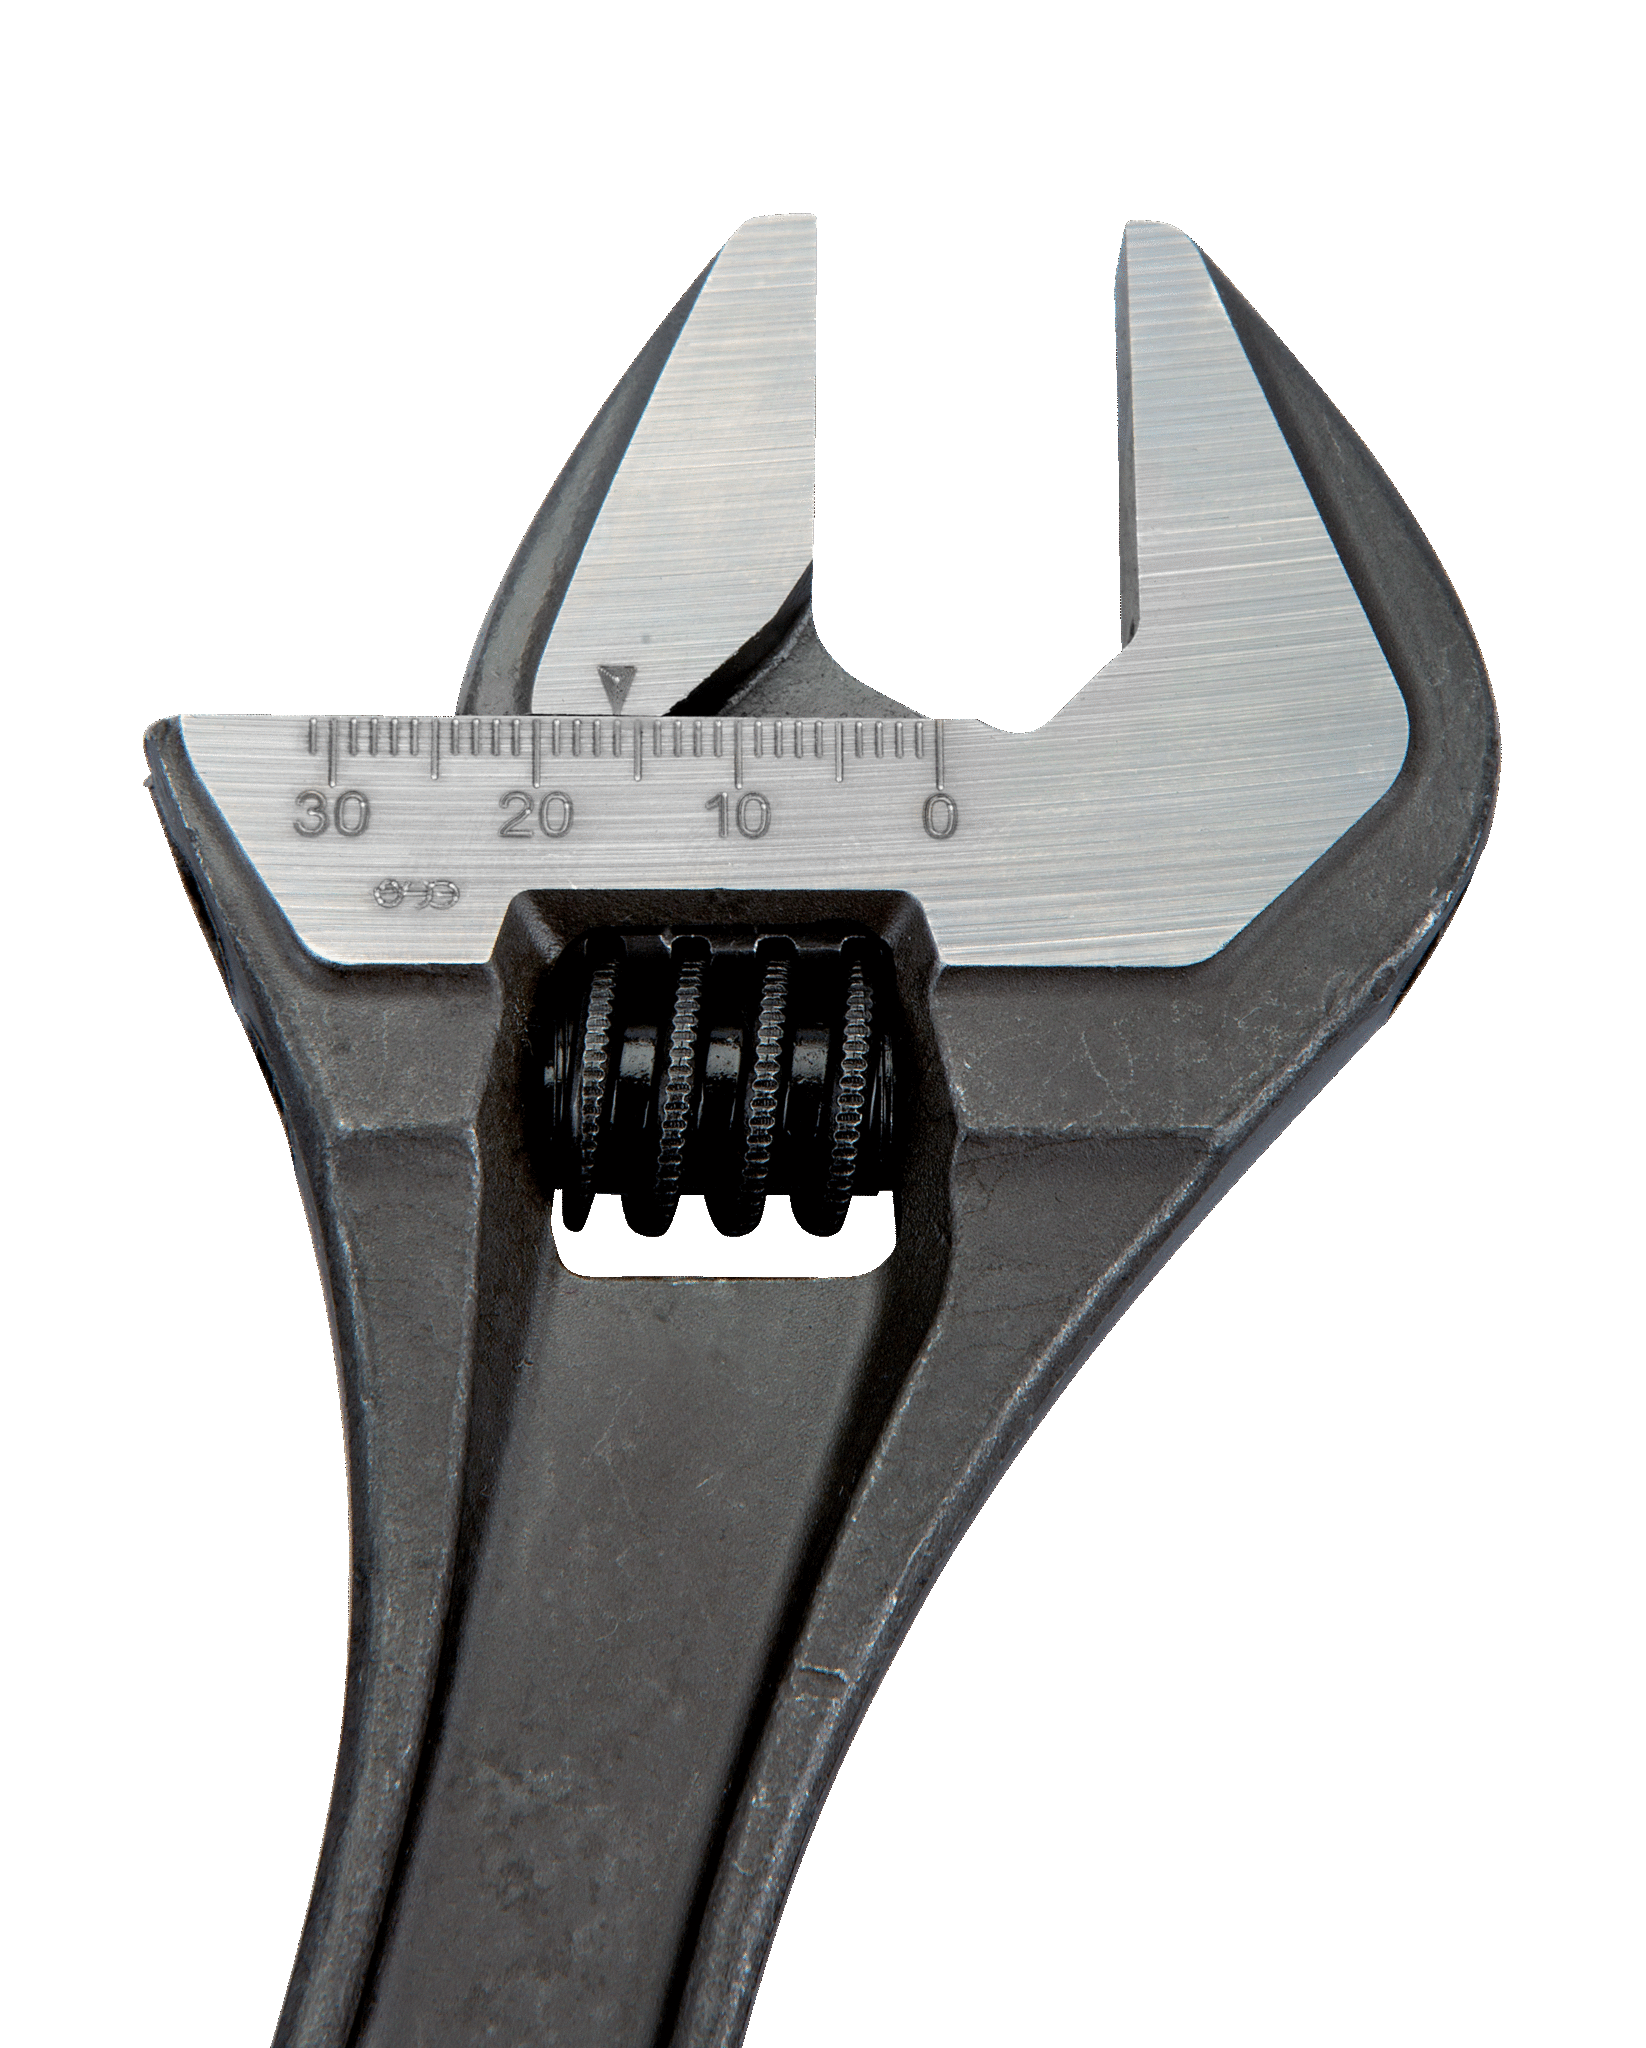 Central Nut Adjustable Wrenches with Phosphate Finish - 8073 by Bahco